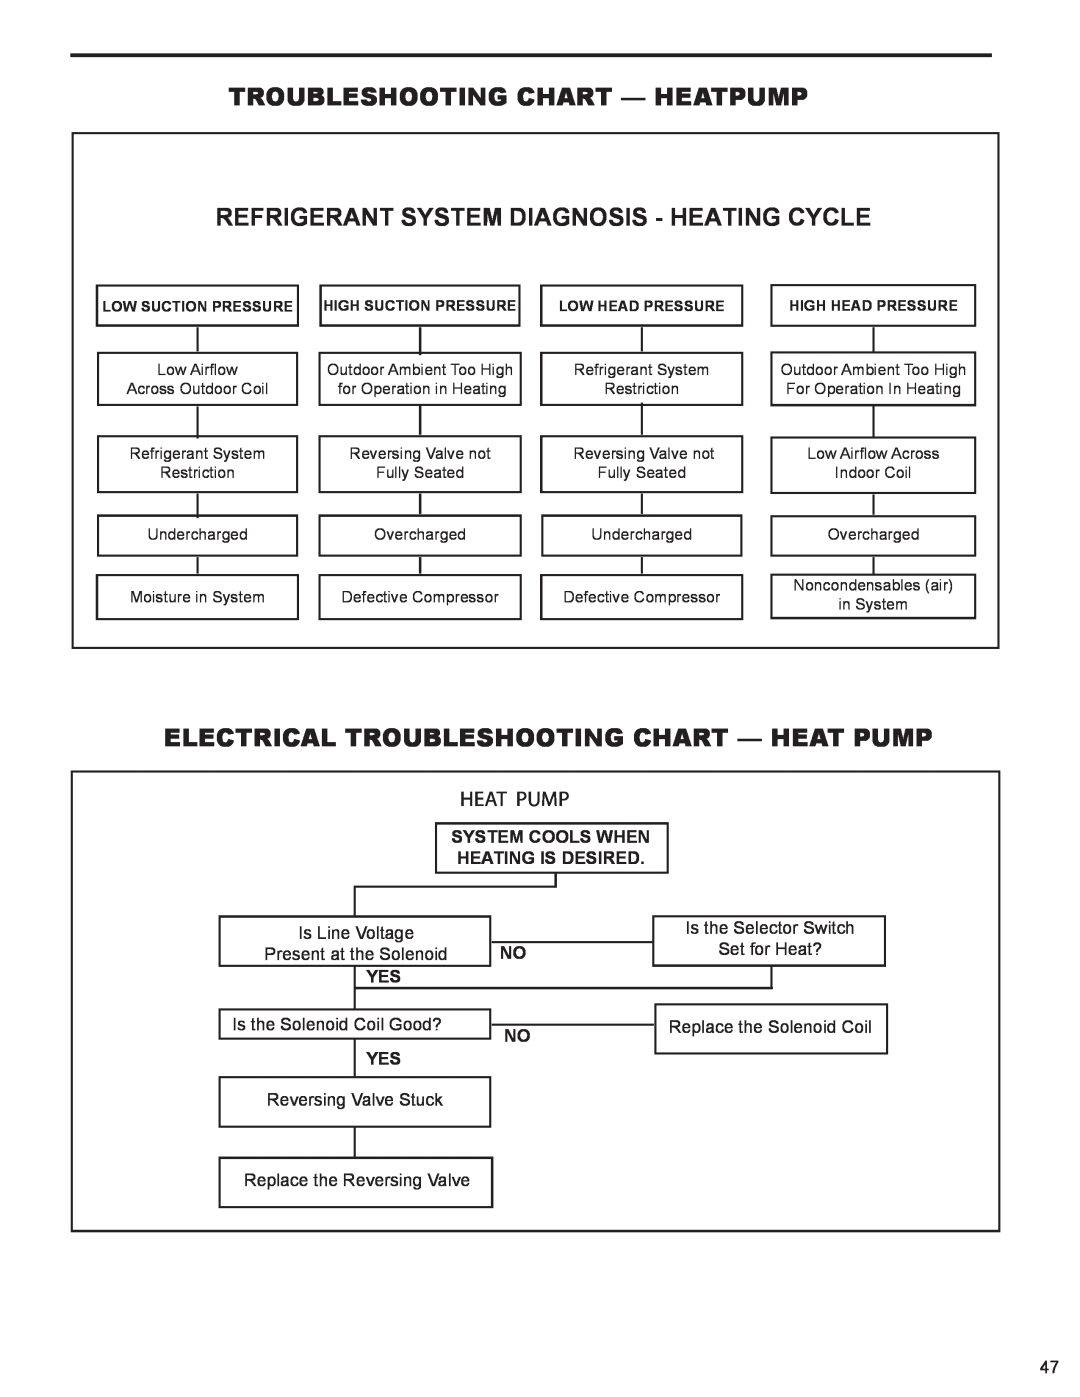 Friedrich 2009, 2008 Refrigerant System Diagnosis - Heating Cycle, Electrical Troubleshooting Chart - Heat Pump 